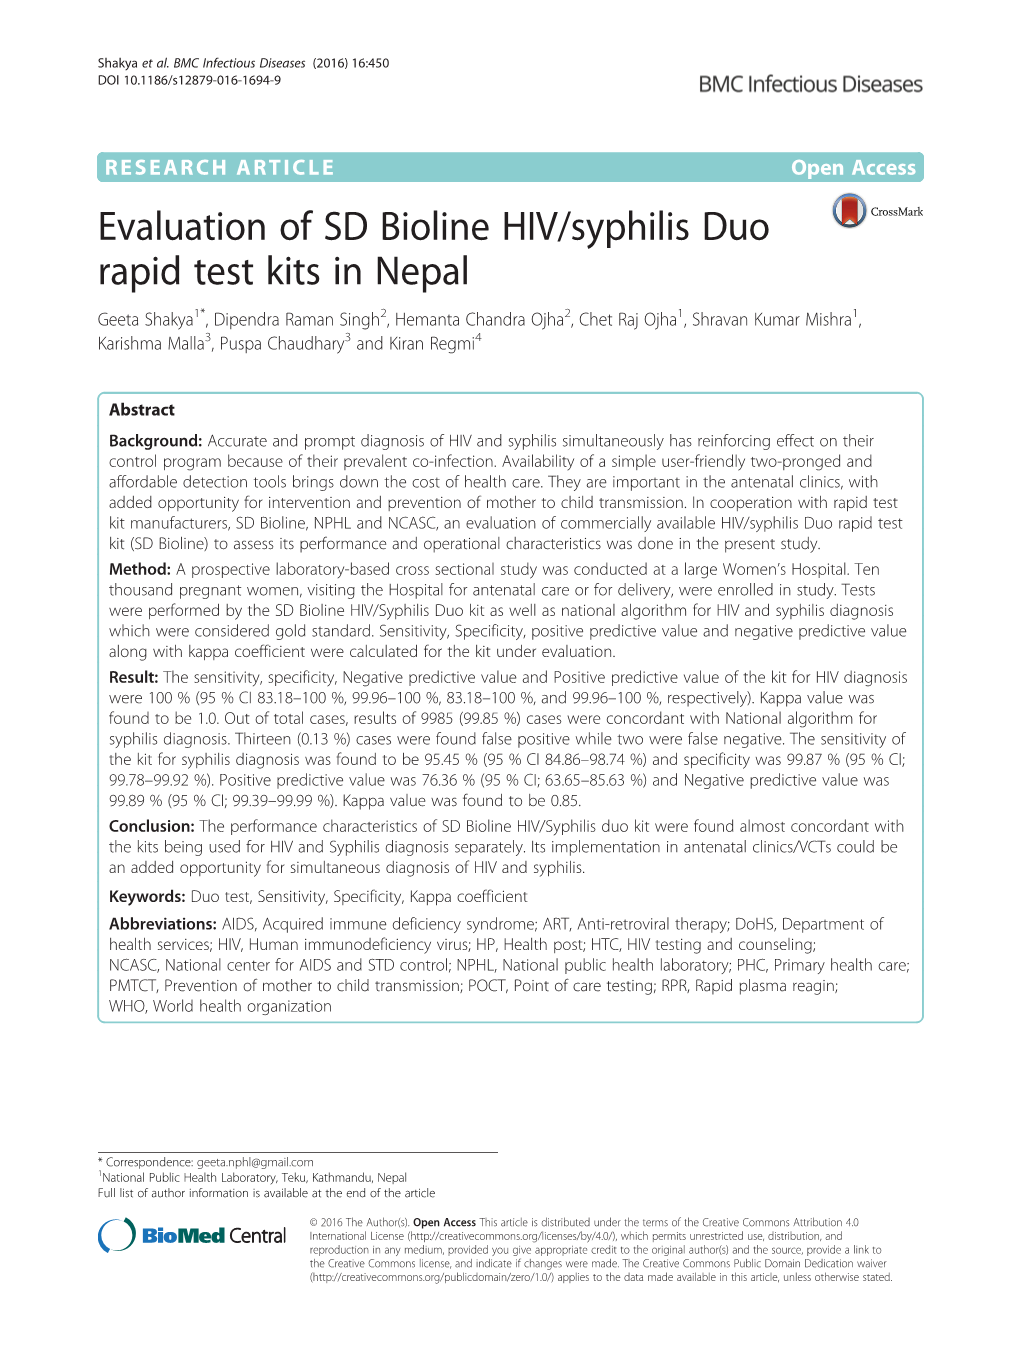 Evaluation of SD Bioline HIV/Syphilis Duo Rapid Test Kits in Nepal